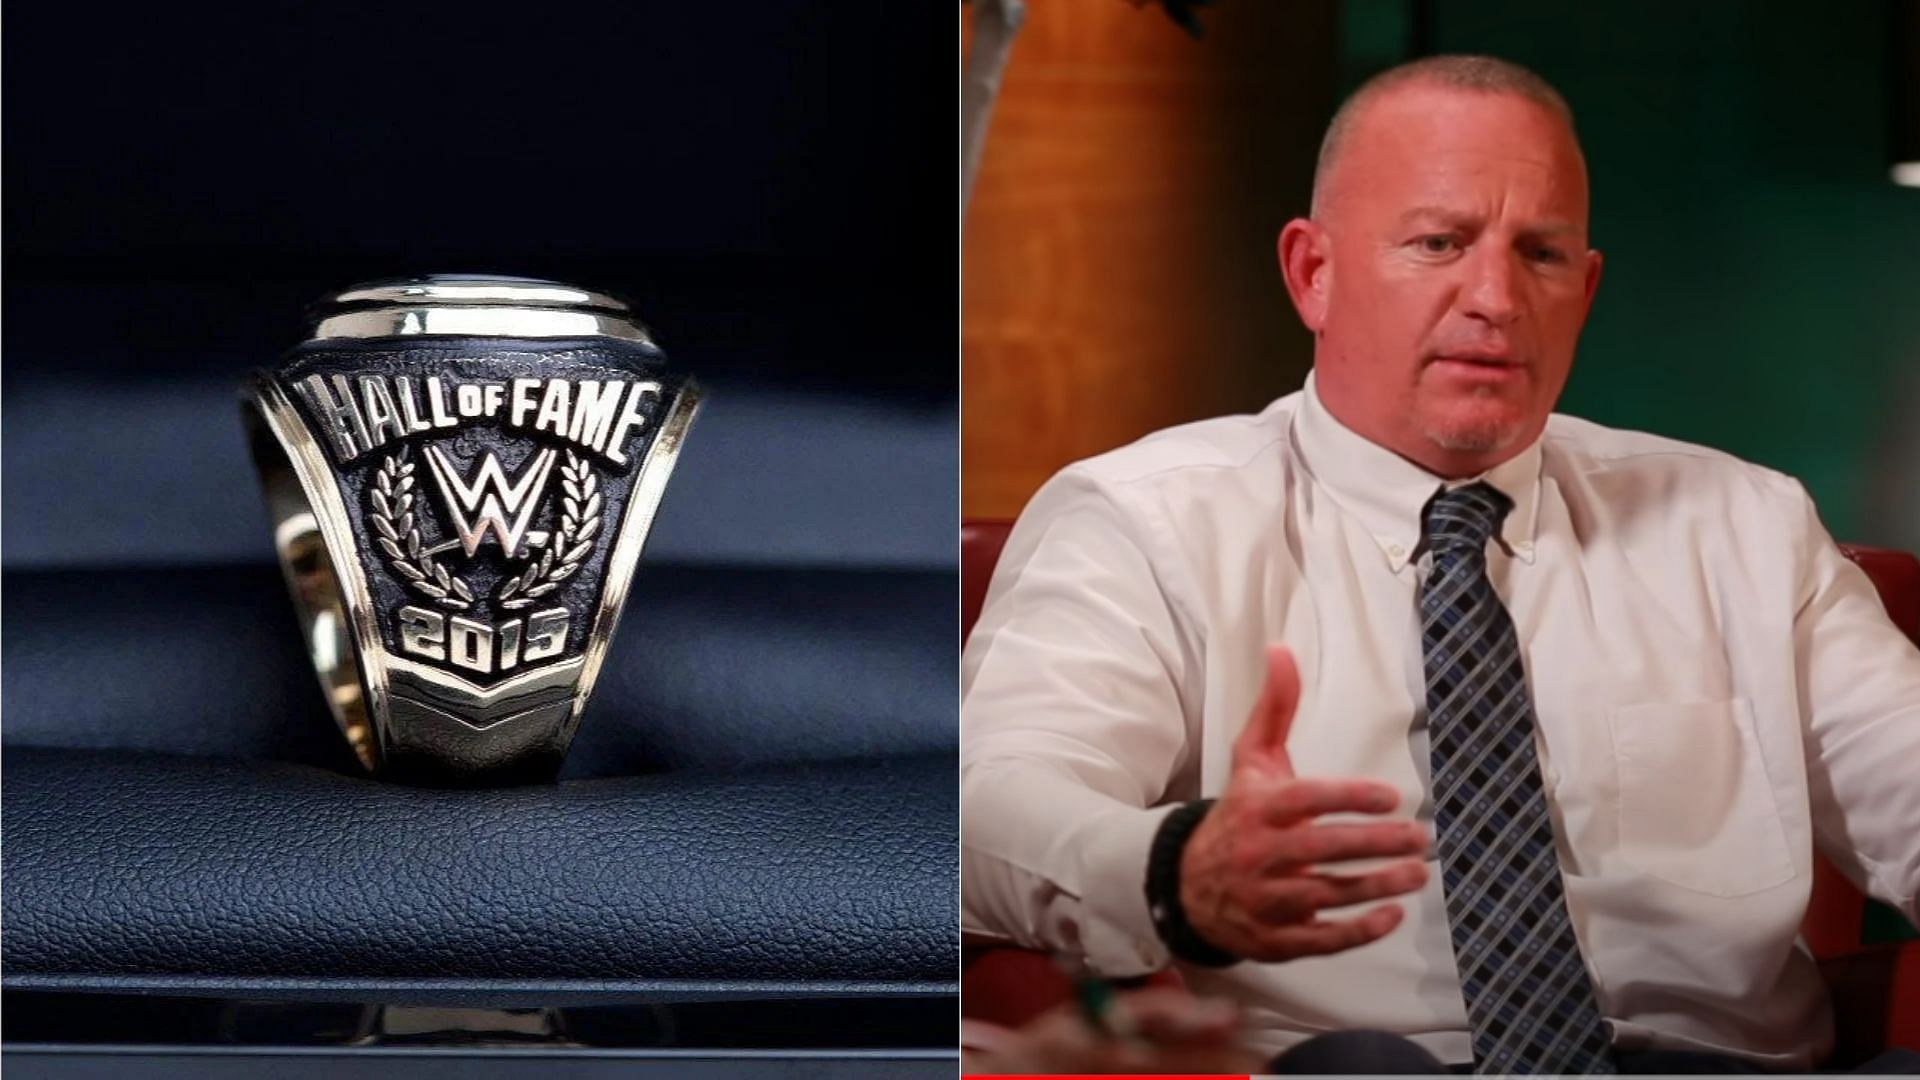 Road Dogg joined the Hall of Fame in 2019.